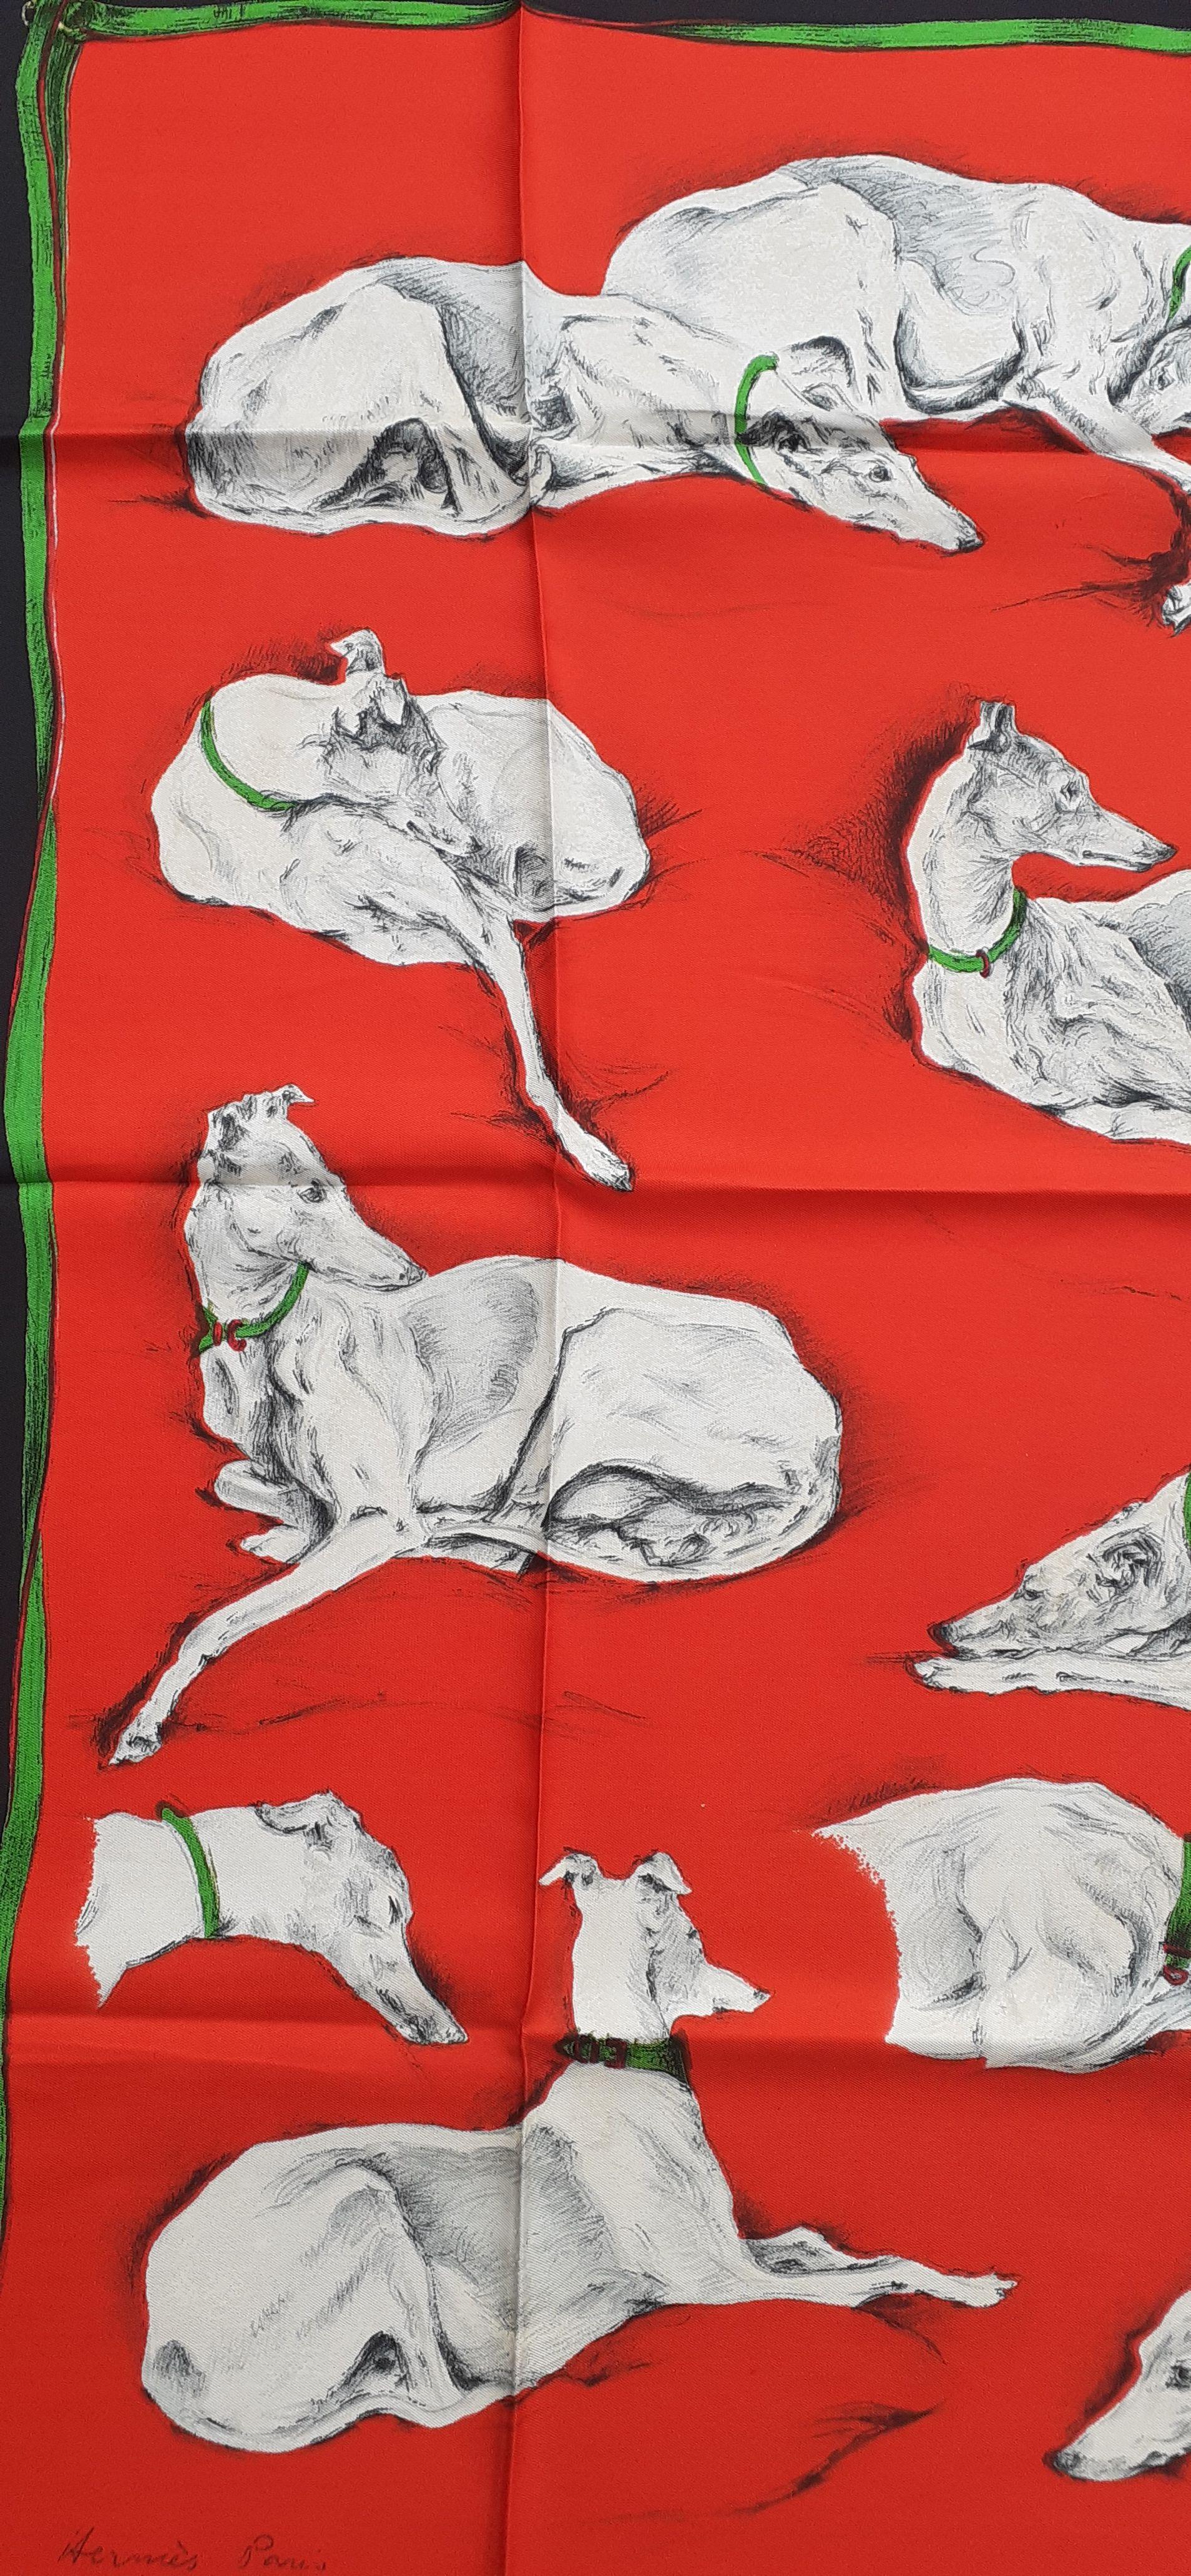 Stunning Authentic Hermès Scarf
 
Print: Lévriers (Greyhound dogs)

Design by Xavier De Poret in 1956

Made in France

Made of 100% Silk

Colorways: Black border, Red background, Beige and Grey Greyhounds with Green necklace

